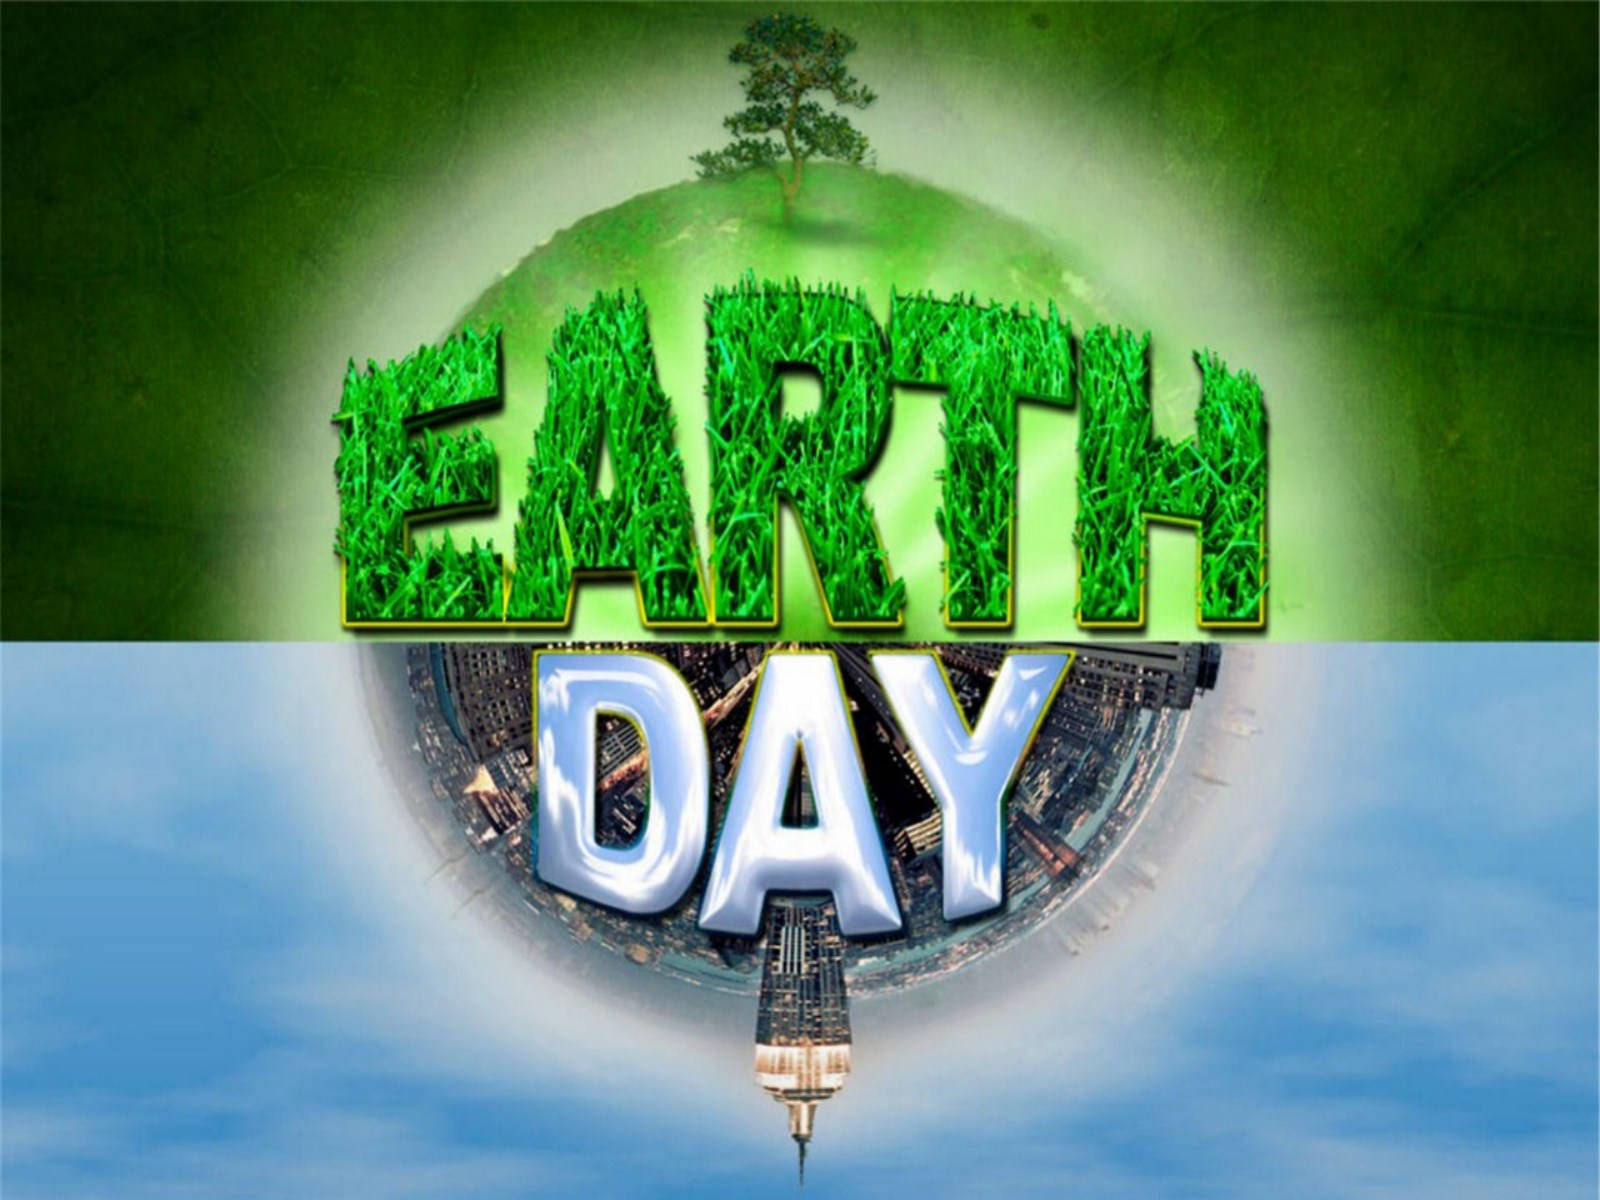 "Celebrating Earth Day with Vibrant Word Art" Wallpaper